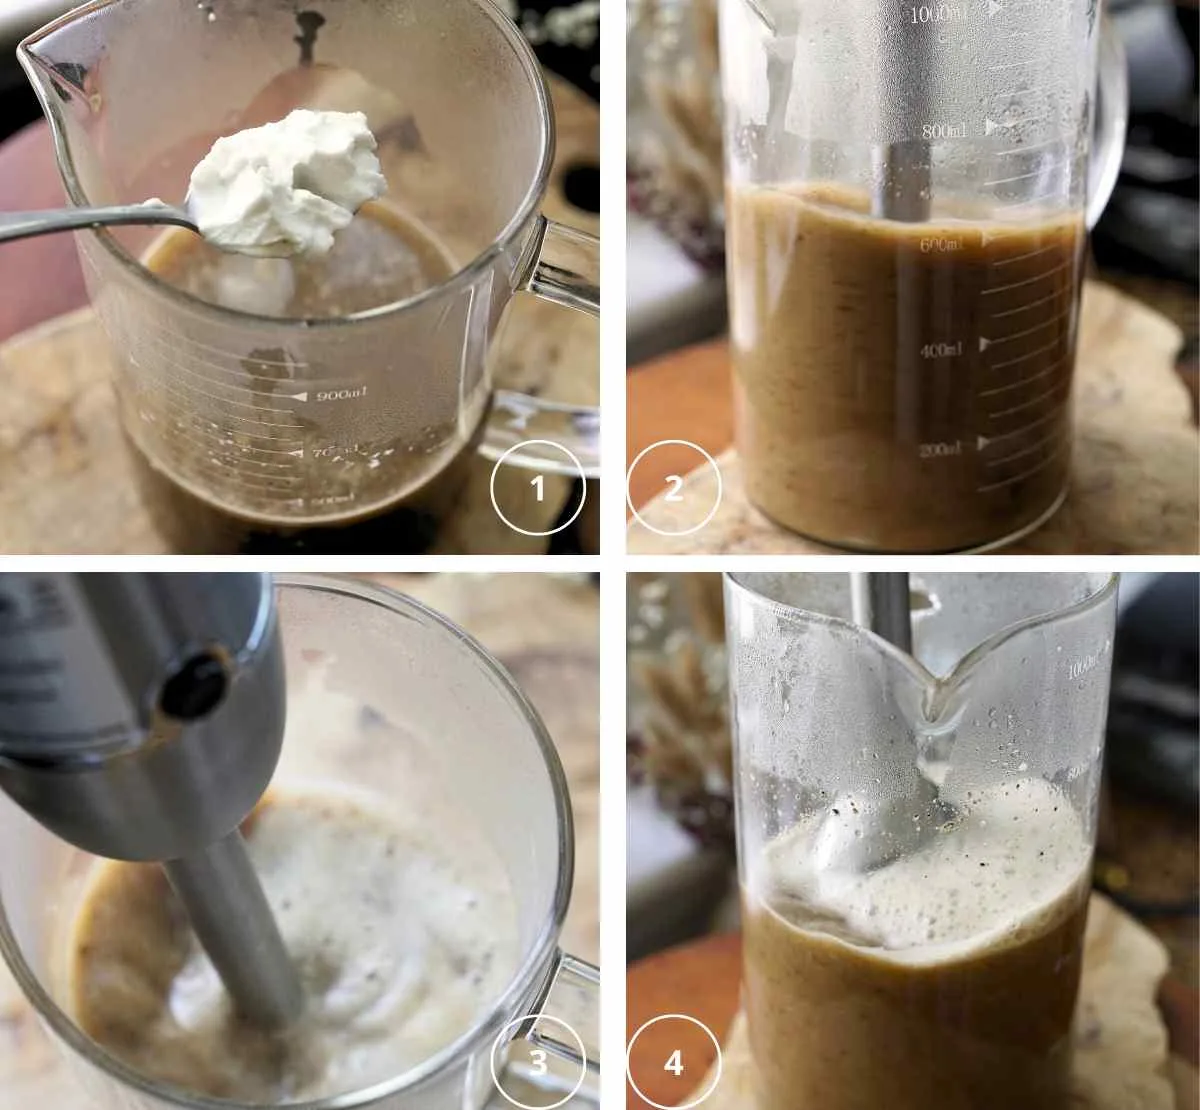 Process pictures showing how to make herbal coffee recipe with coconut cream ans sweetener.